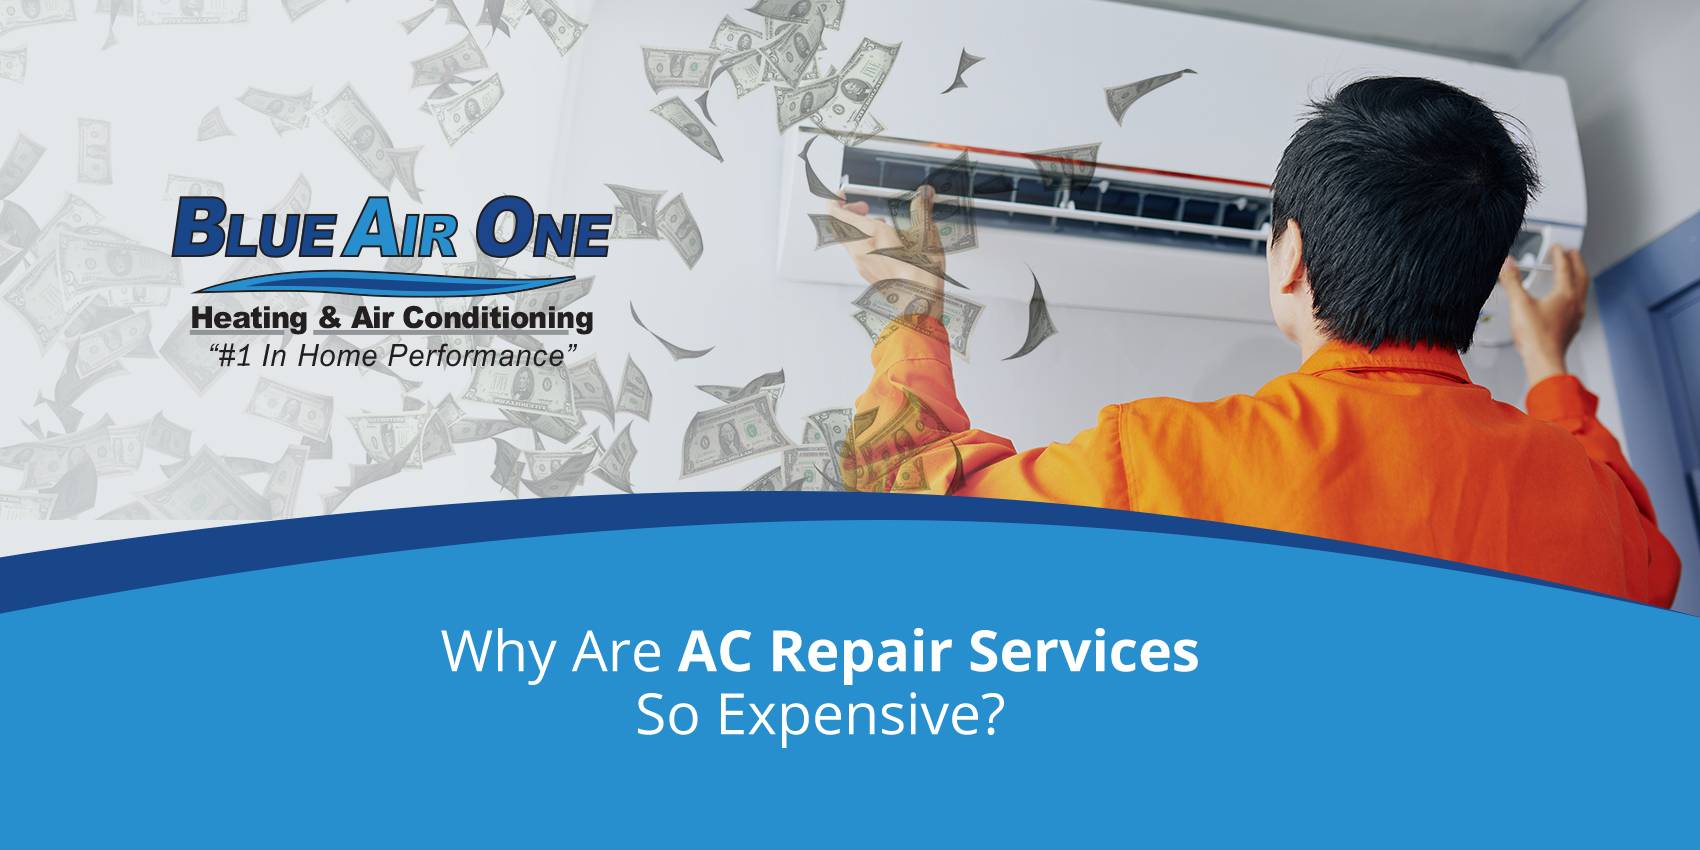 Why Are AC Repair Services So Expensive?